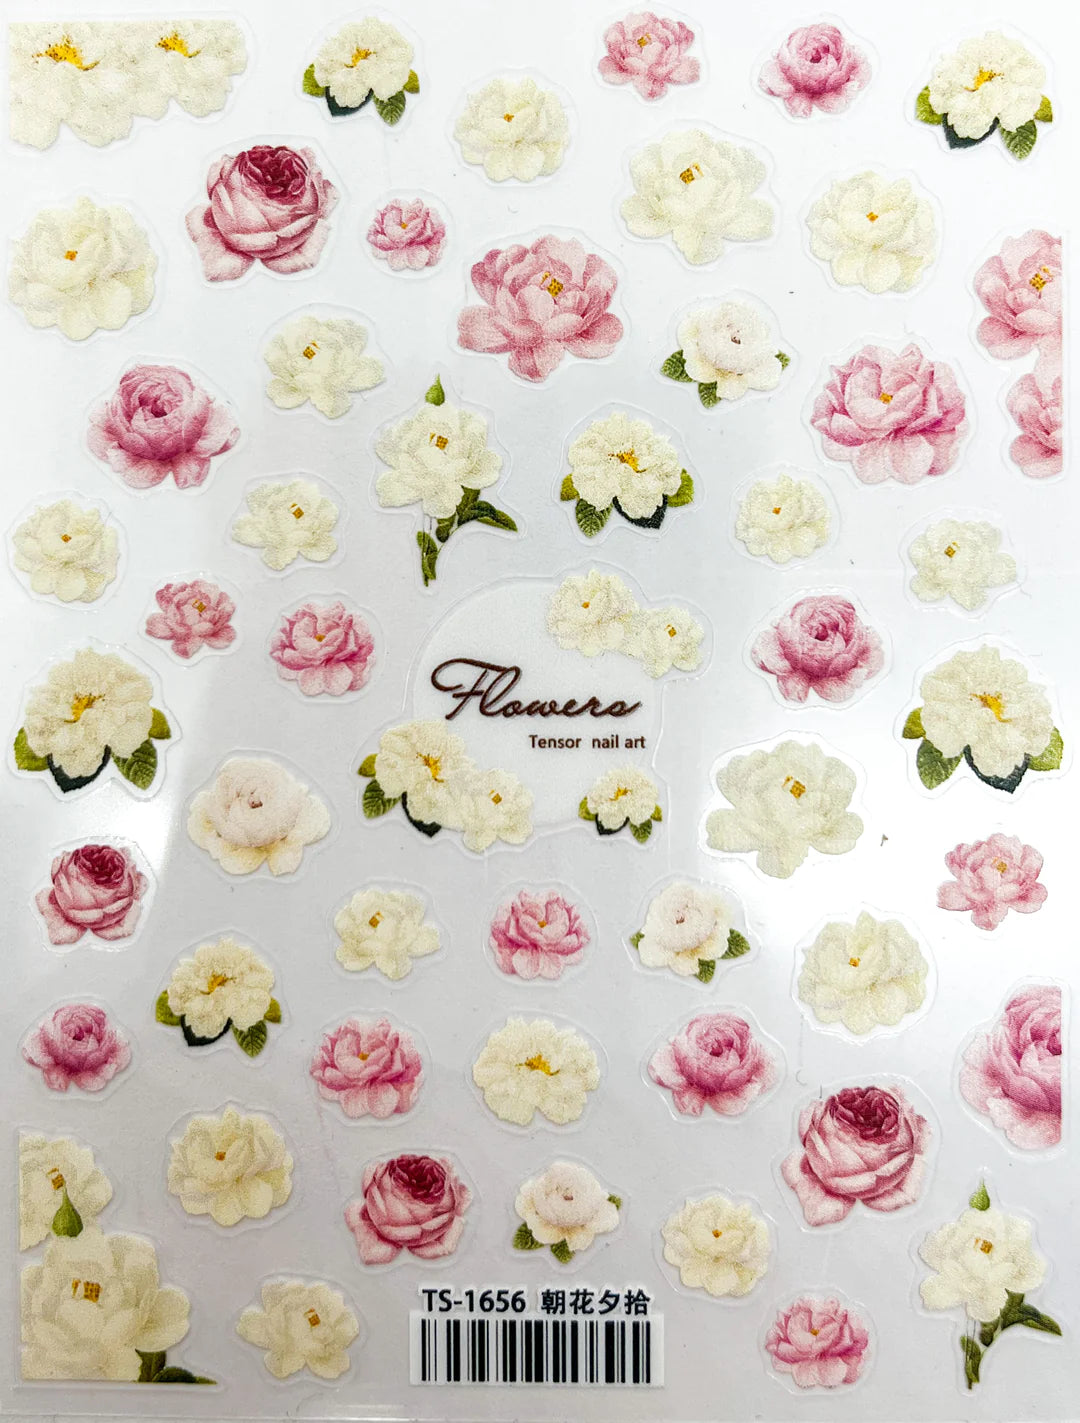 MM - DECALS -- TS-1656 "PEONIES"